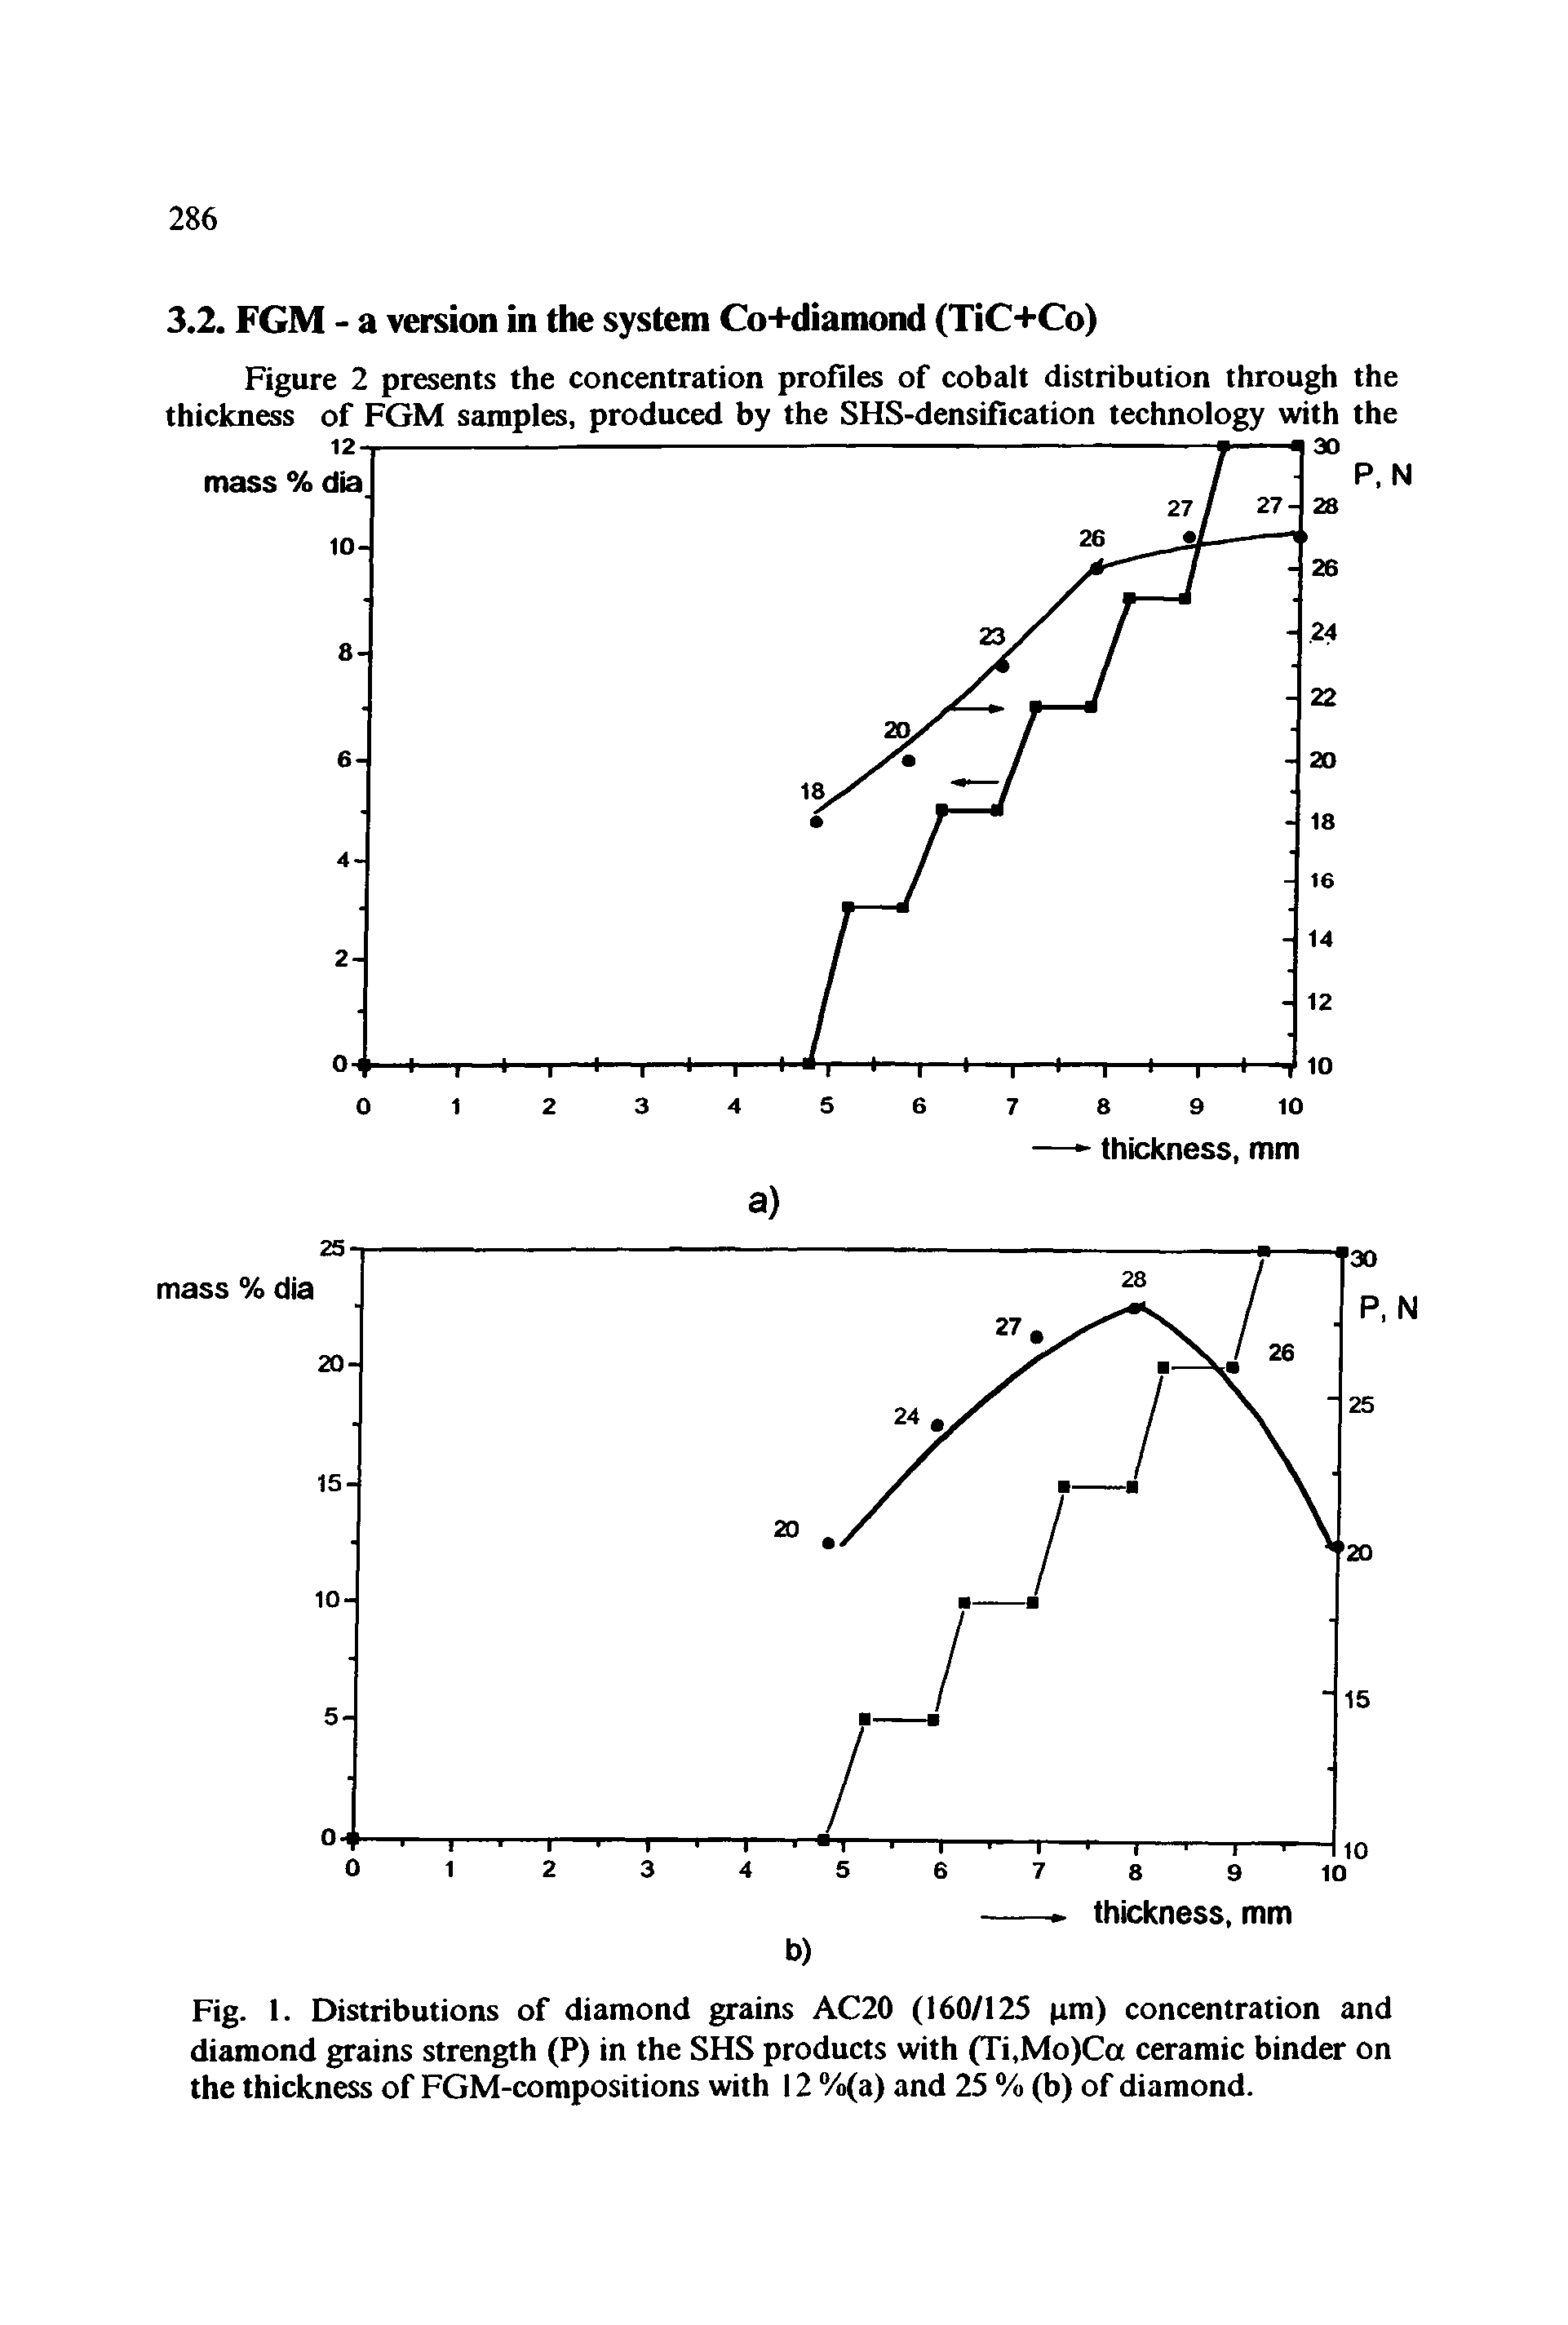 Fig. 1. Distributions of diamond grains AC20 (160/125 pm) concentration and diamond grains strength (P) in the SHS products with (Ti,Mo)Ca ceramic binder on the thickness of FGM-compositions with 12 %(a) and 25 % (b) of diamond.